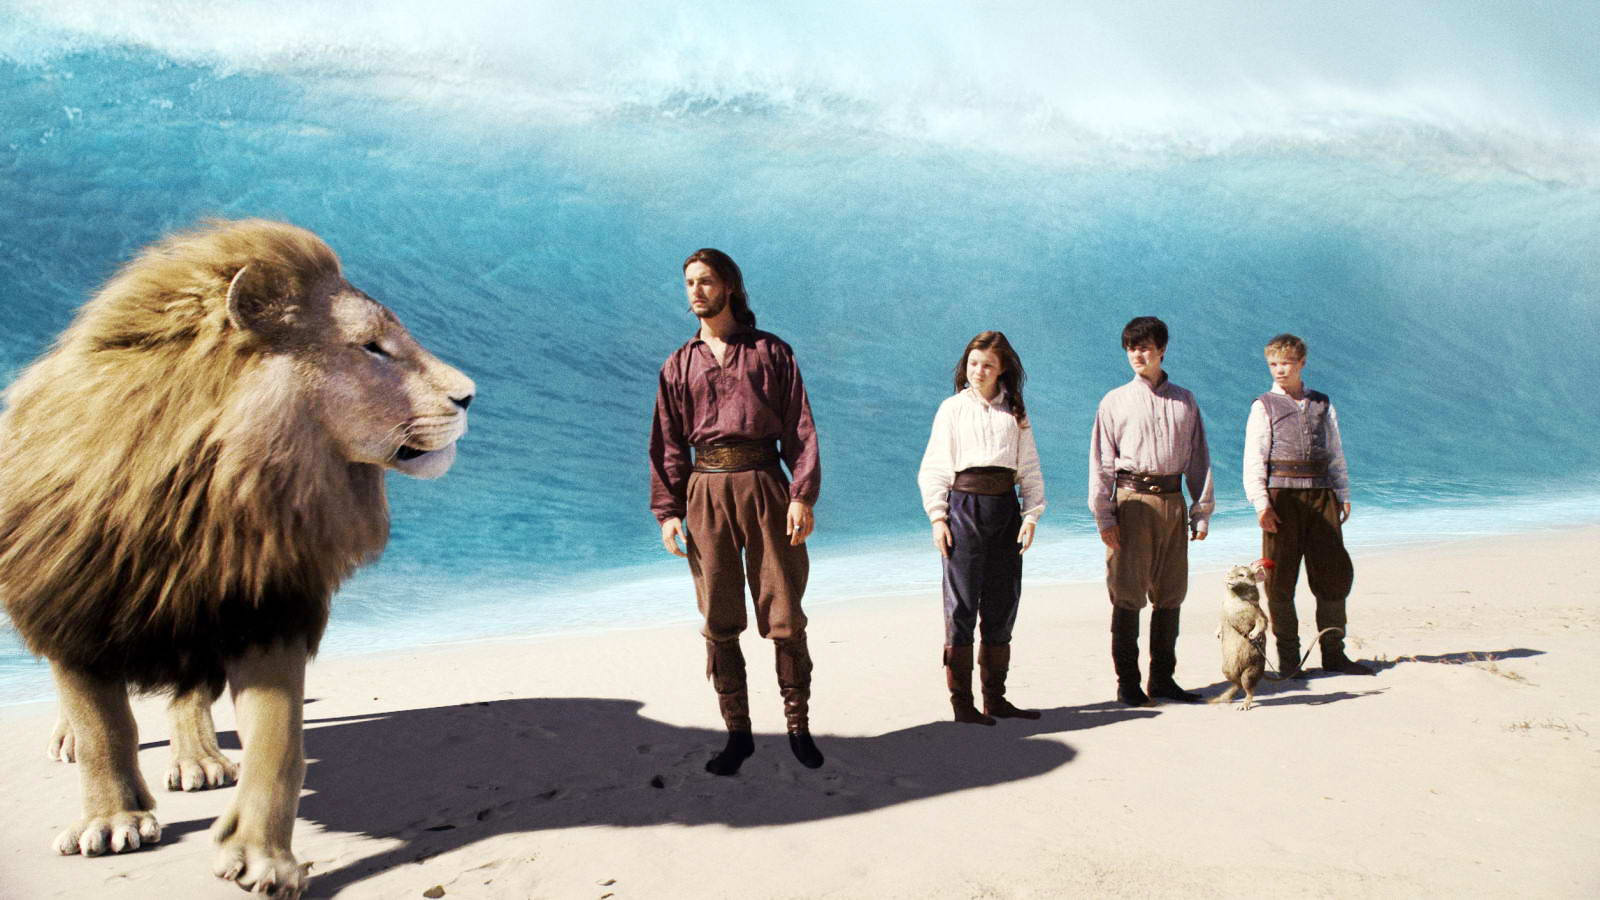 Ben Barnes, Georgie Henley and Skandar Keynes in Fox Walden's The Chronicles of Narnia: The Voyage of the Dawn Treader (2010)